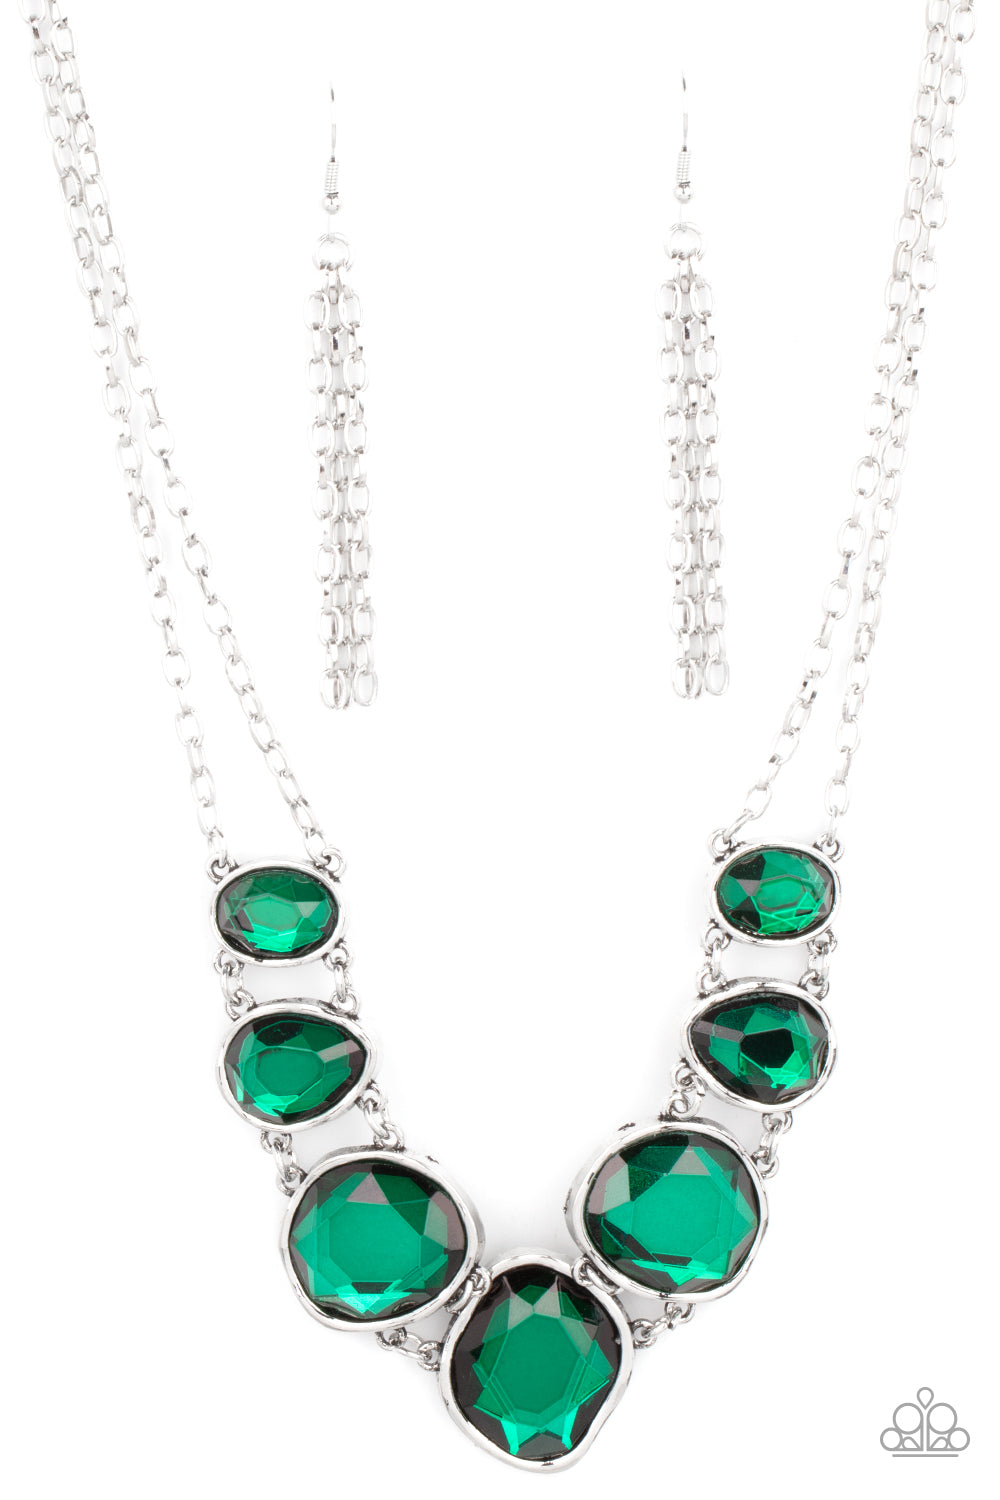 Absolute Admiration Green-Necklace